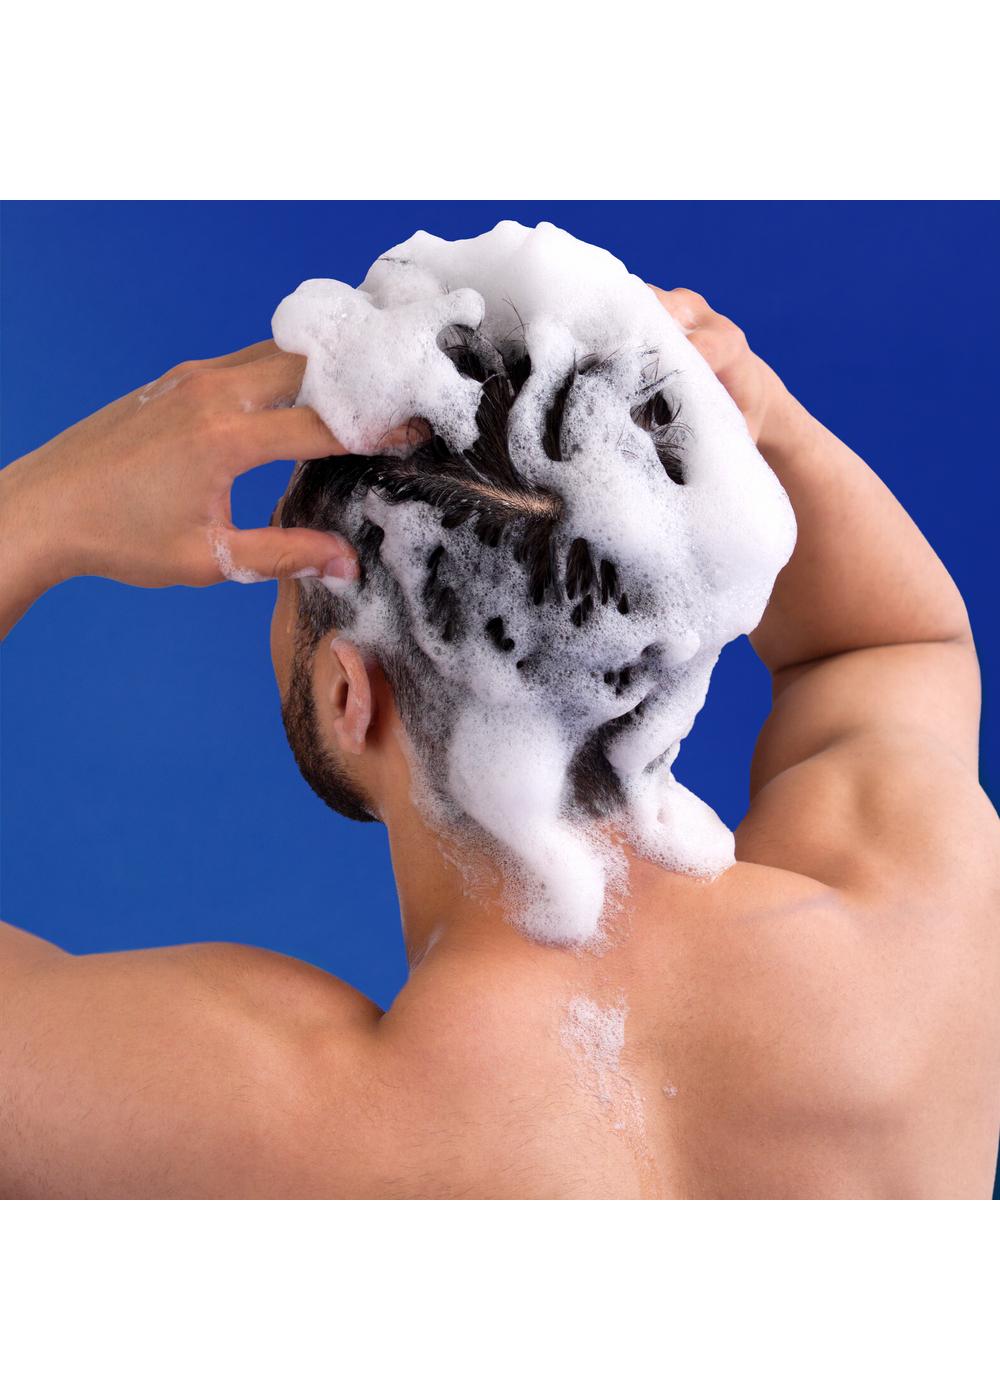 Head & Shoulders Old Spice 2 in 1 Men Dandruff Shampoo + Conditioner - Swagger; image 11 of 11